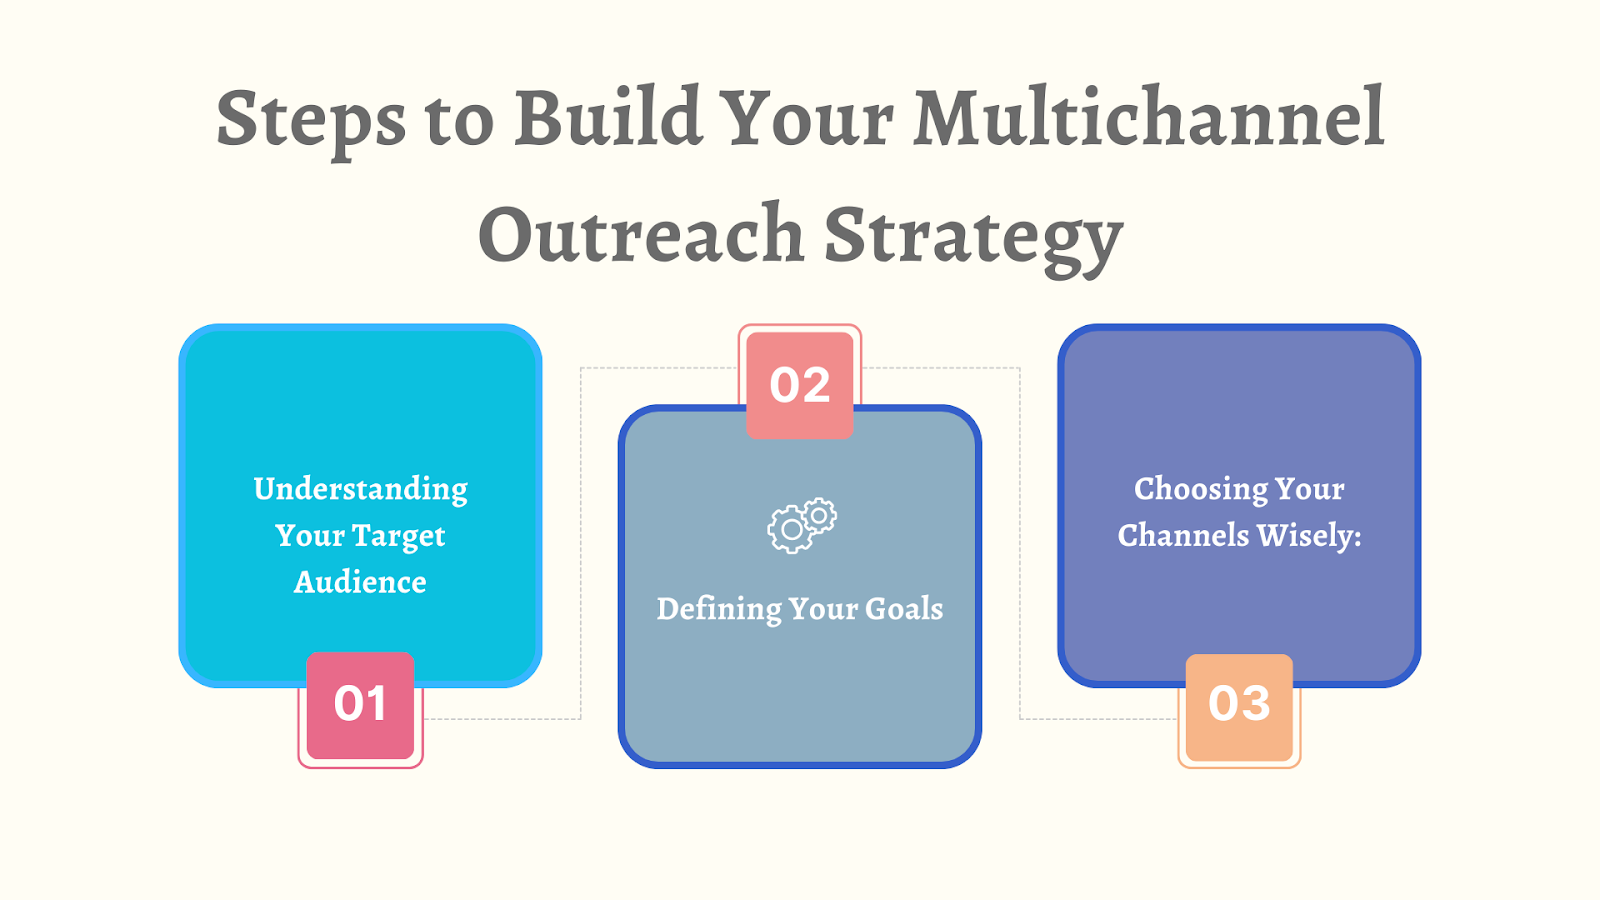 Steps to Build Your Multichannel Outreach Strategy